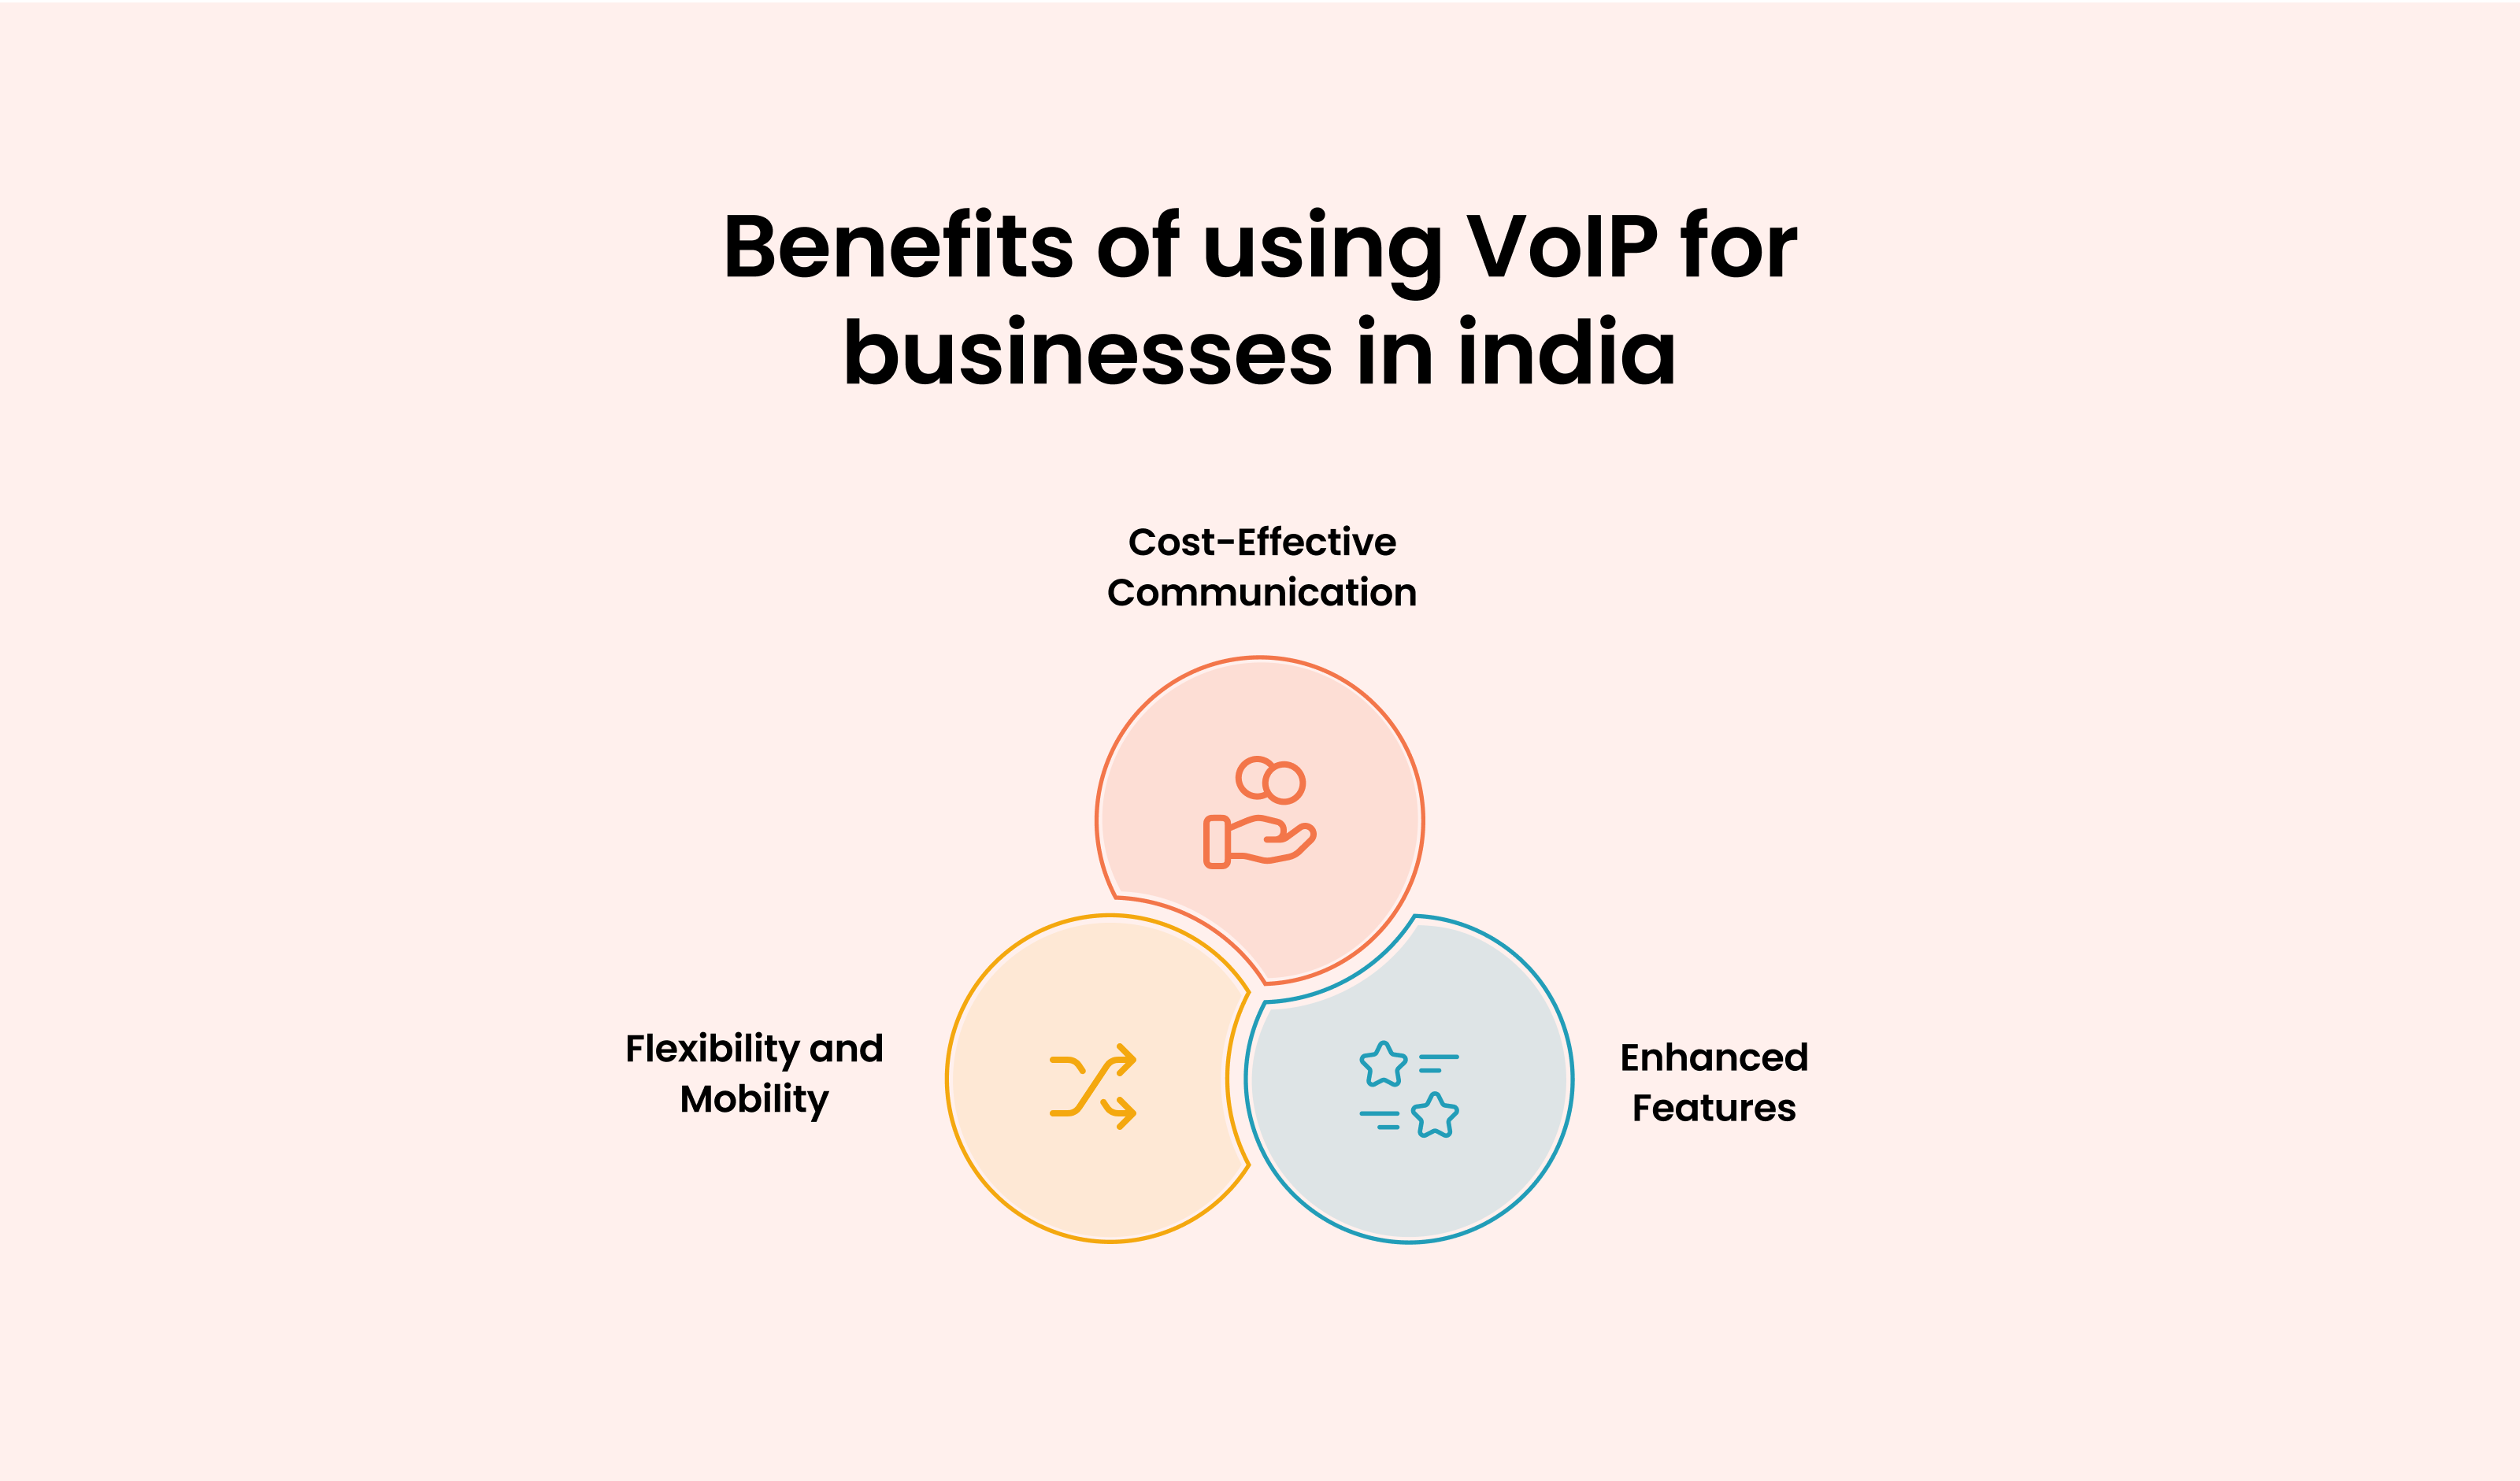 Benefits of Using VoIP for Businesses in India: